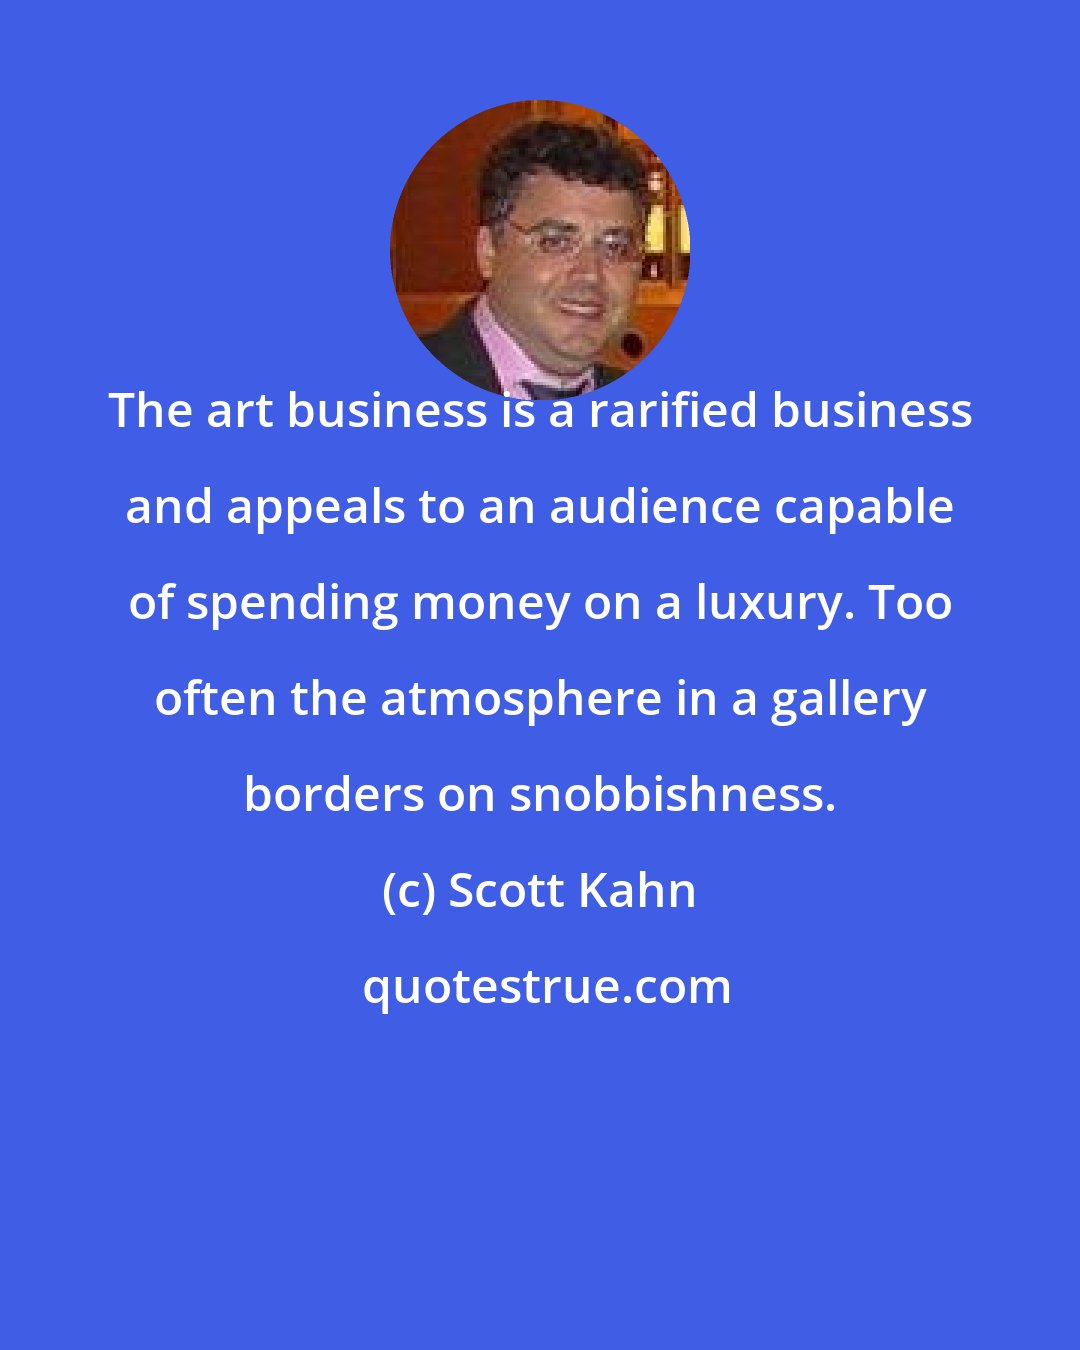 Scott Kahn: The art business is a rarified business and appeals to an audience capable of spending money on a luxury. Too often the atmosphere in a gallery borders on snobbishness.